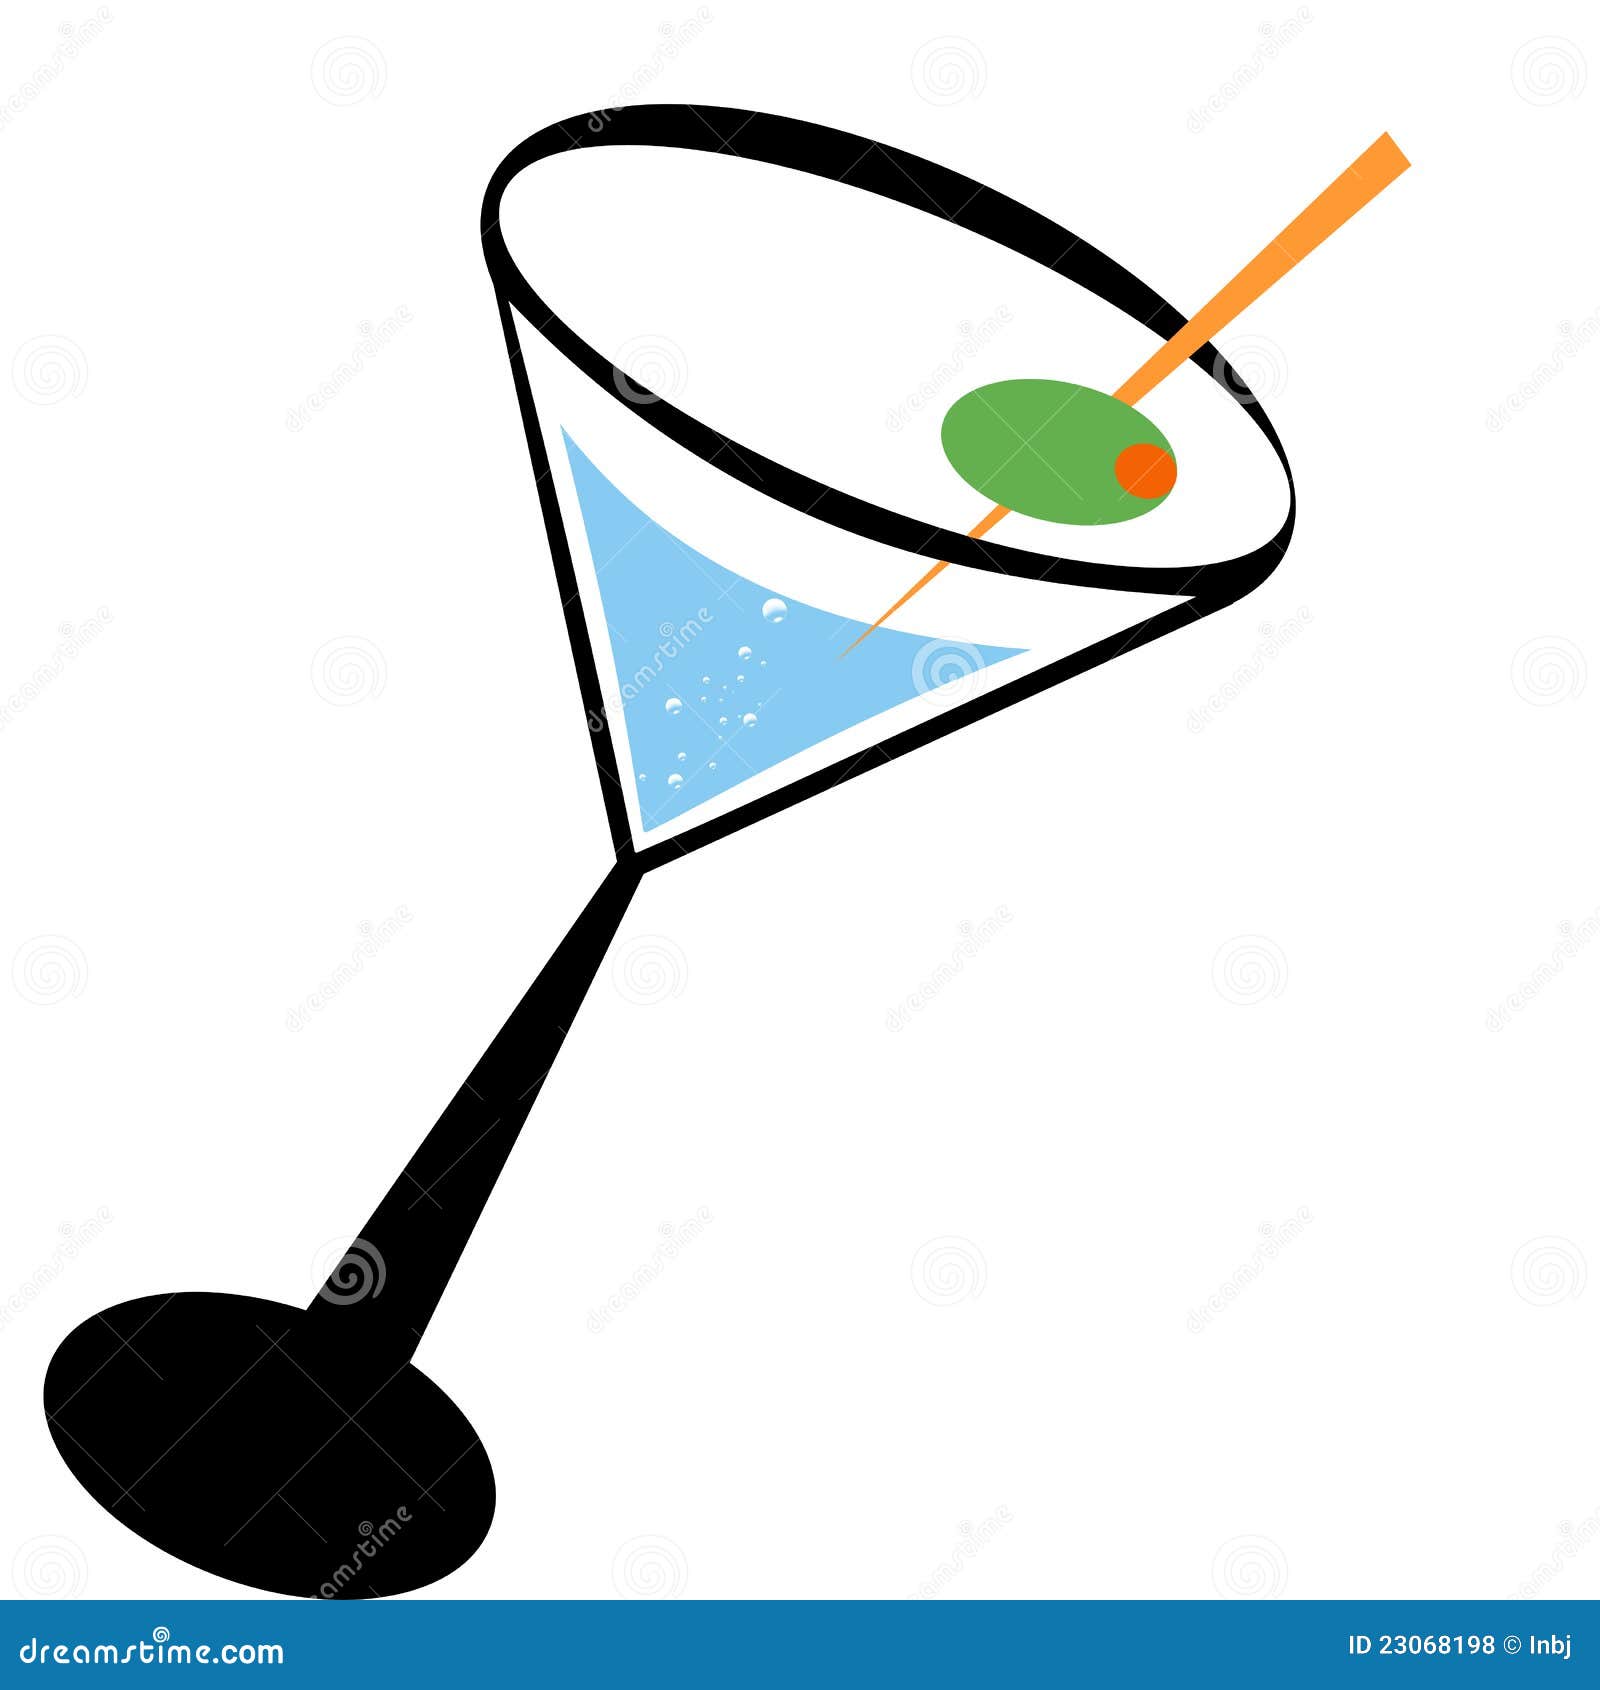 Cocktail and olive stock vector. Illustration of object - 23068198